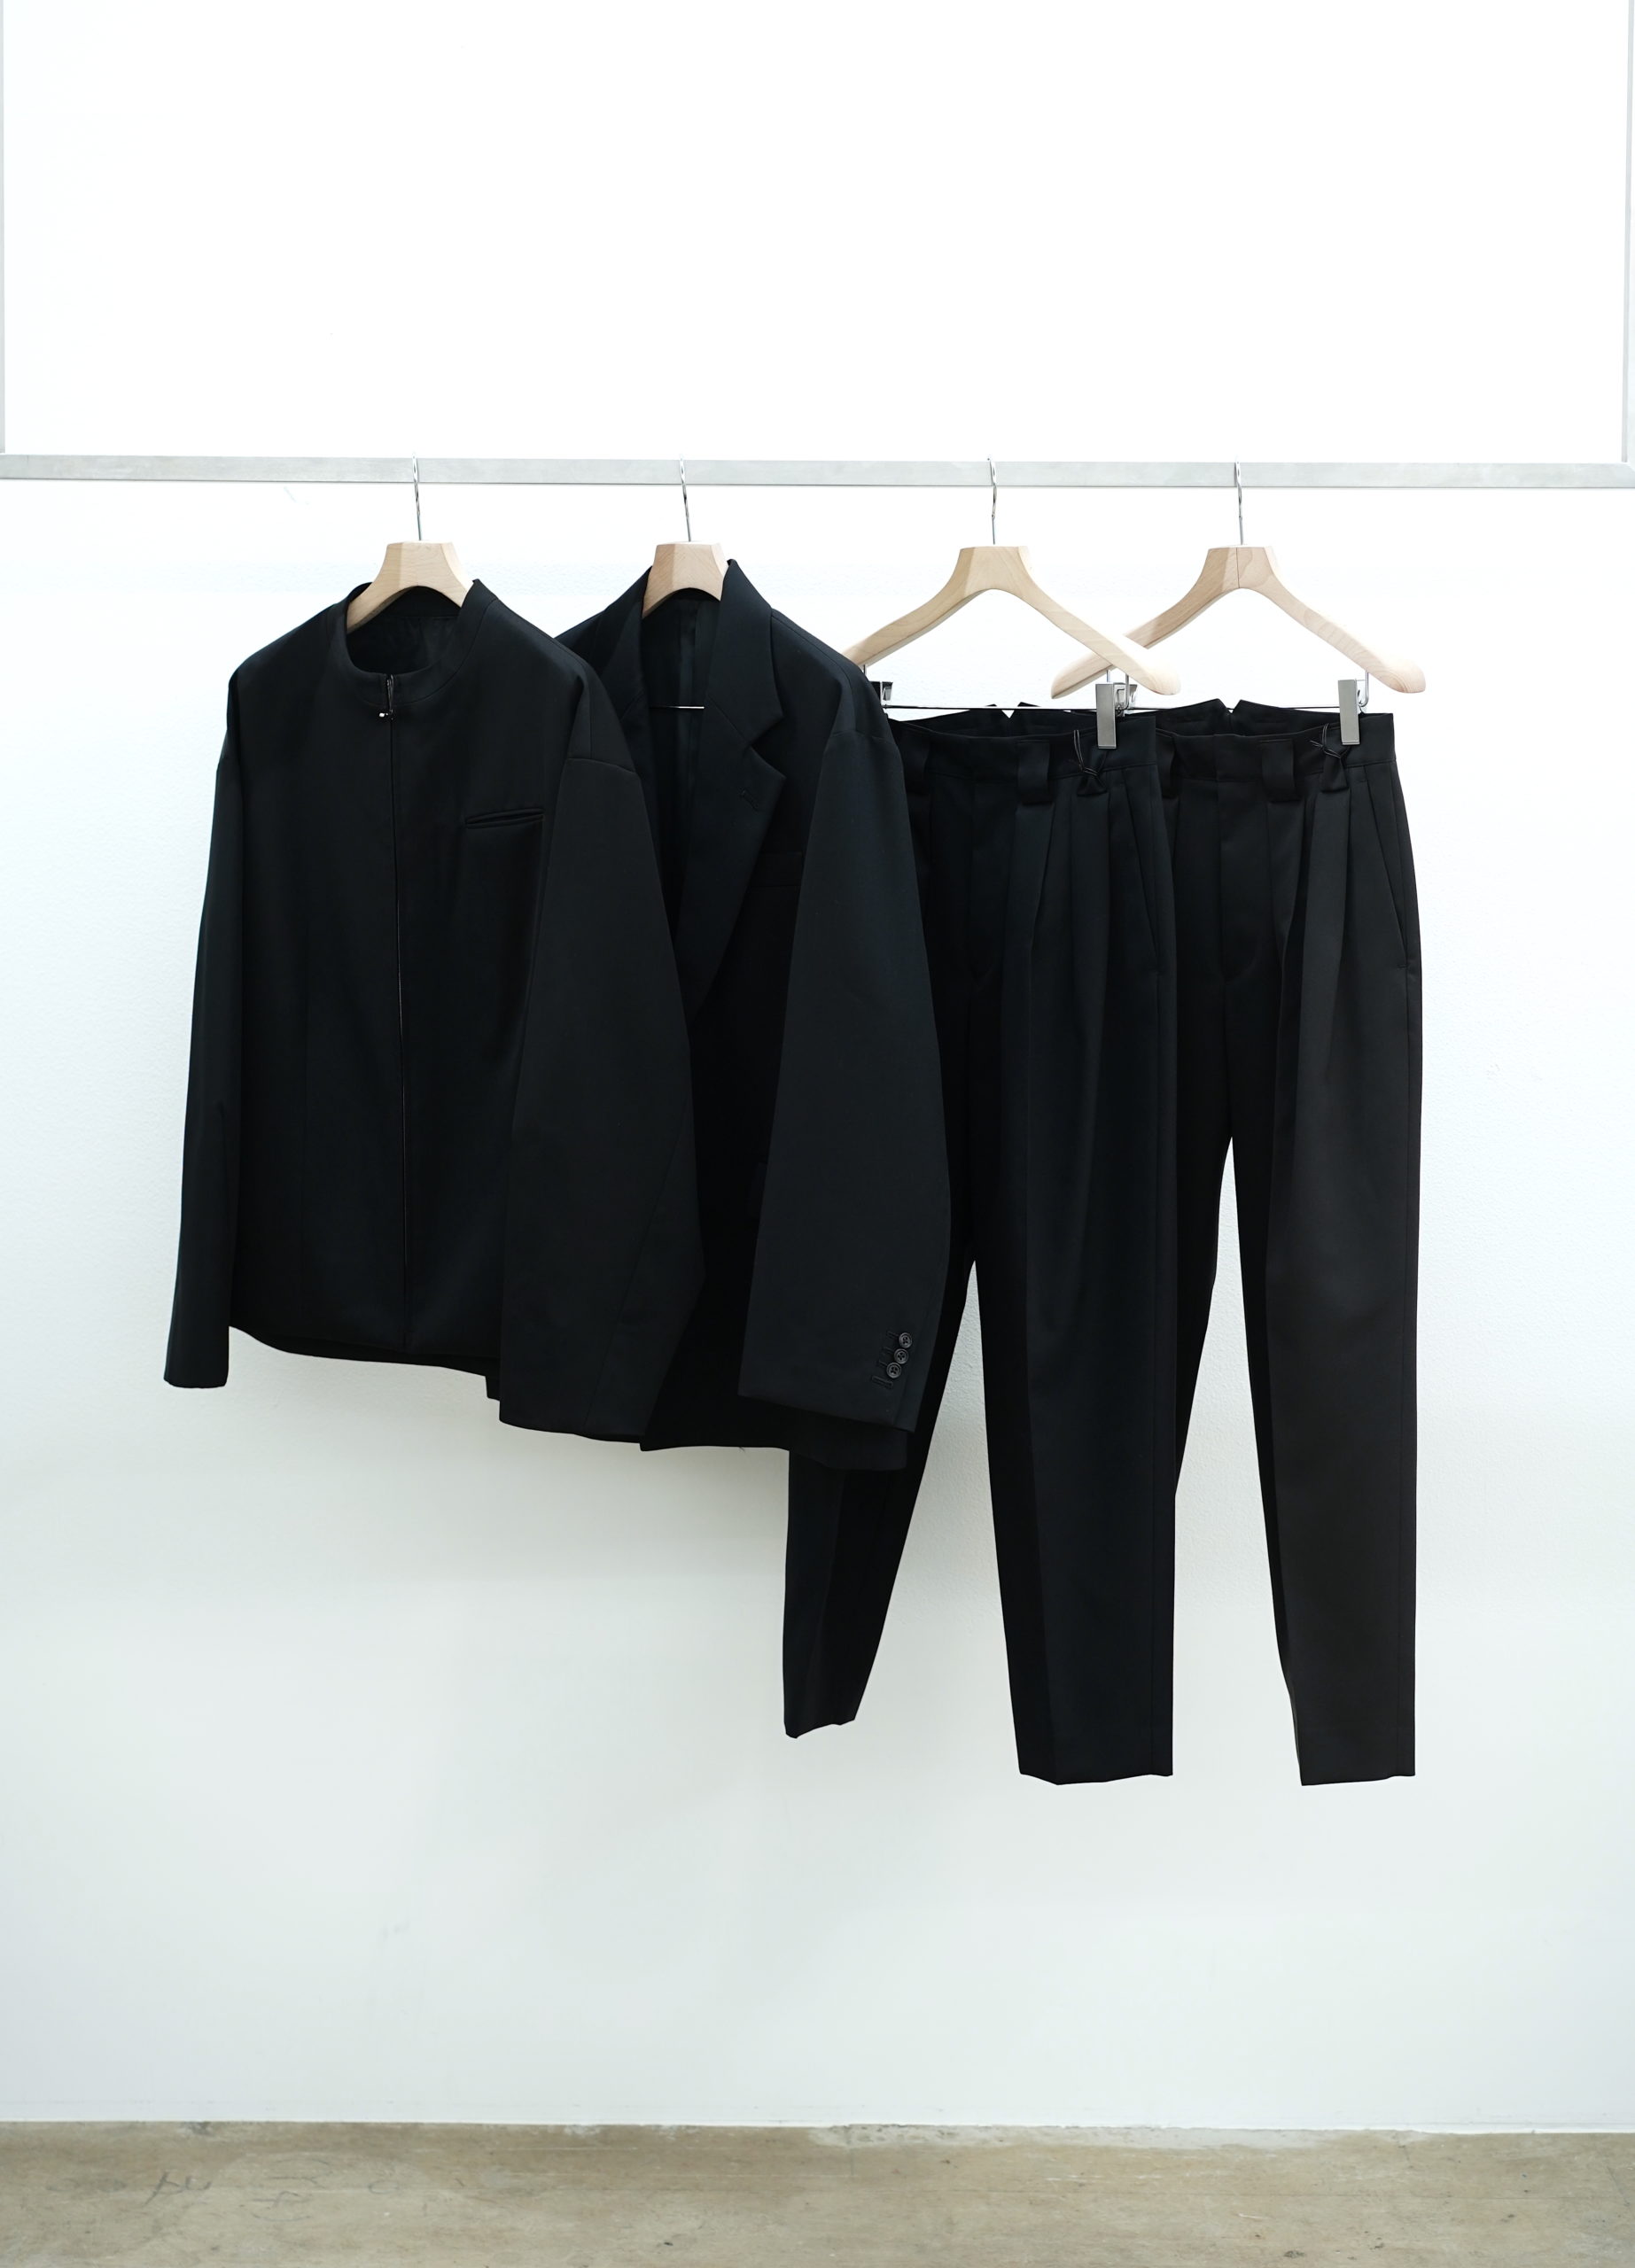 Stein 23SS 2nd Delivery Start | Unlimited -lounge- BLOG